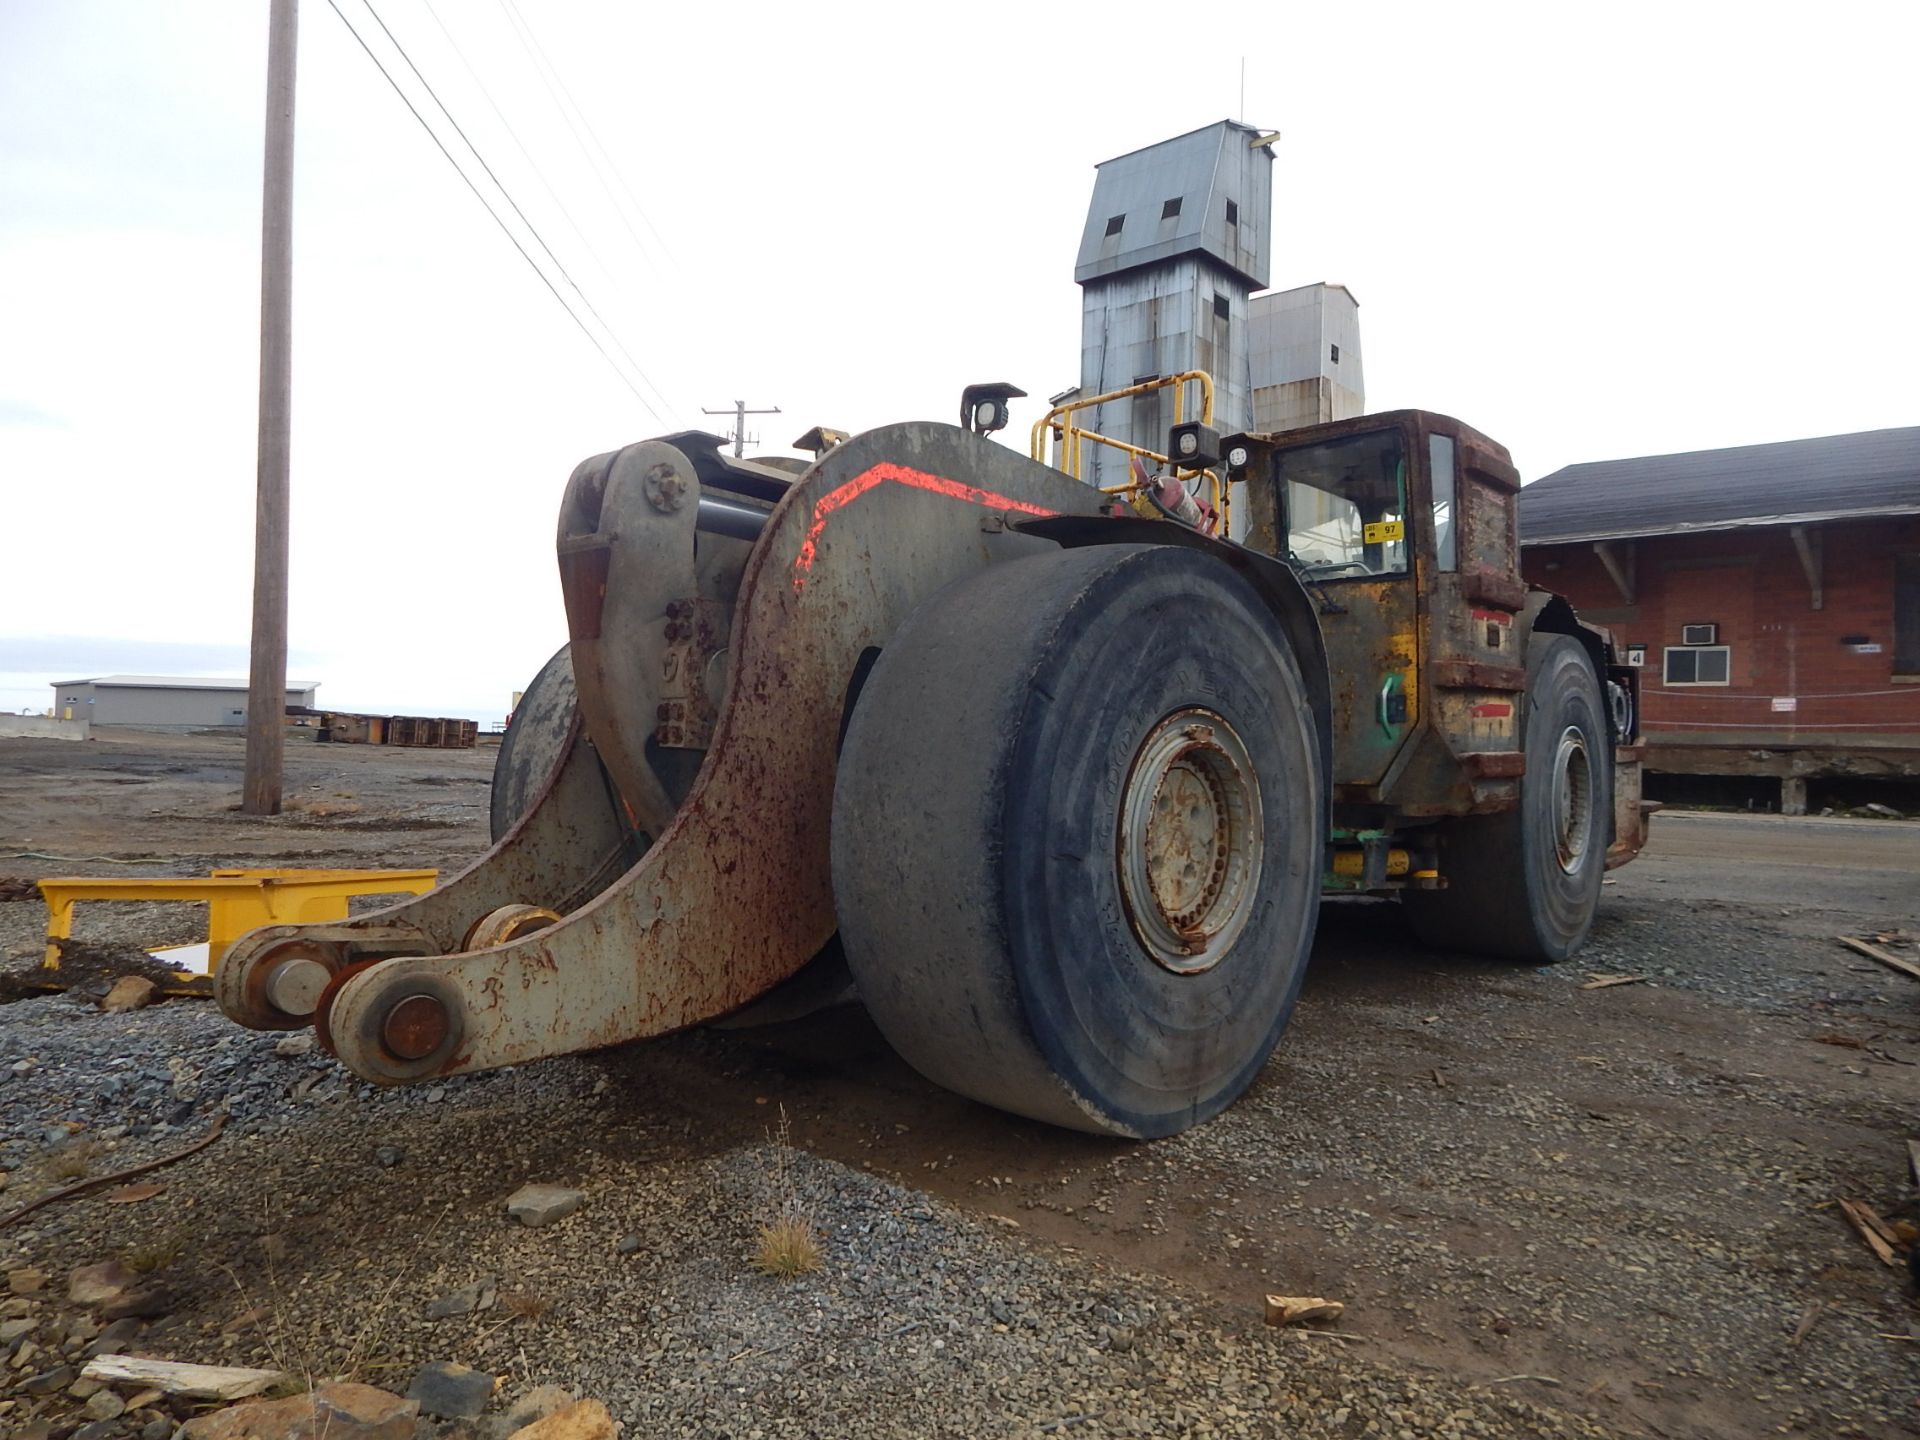 ATLAS COPCO ST1520 SCOOP TRAM WITH 2102 HOURS (RECORDED ON METER AT TIME OF LISTING) S/N: N/A / - Image 3 of 4